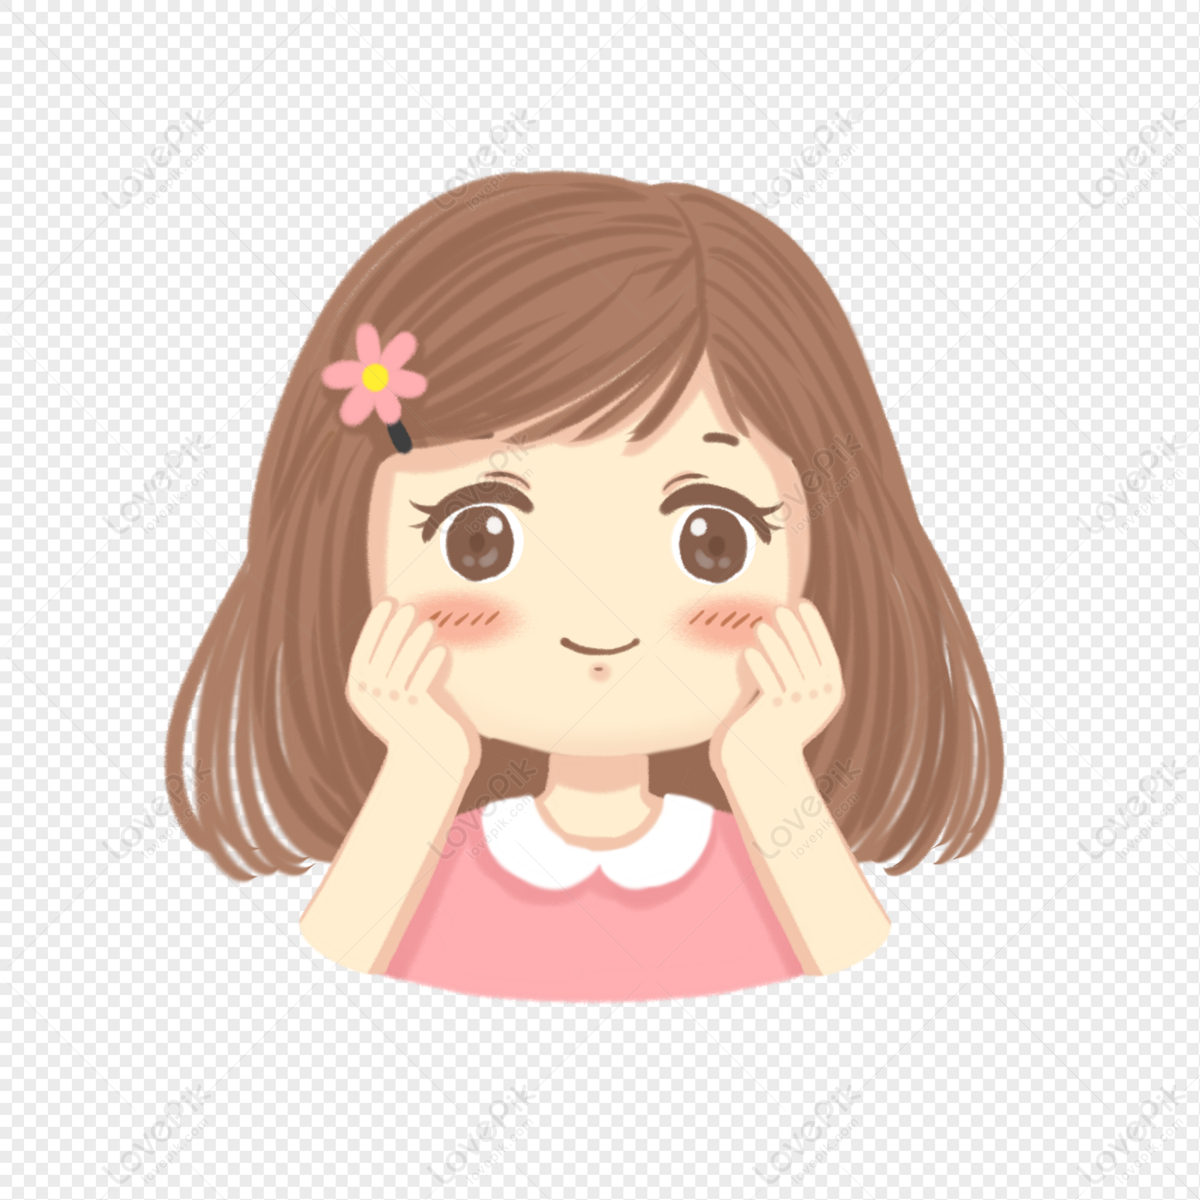 Cute Girl Avatar PNG Image Free Download And Clipart Image For Free Download  - Lovepik | 401231841